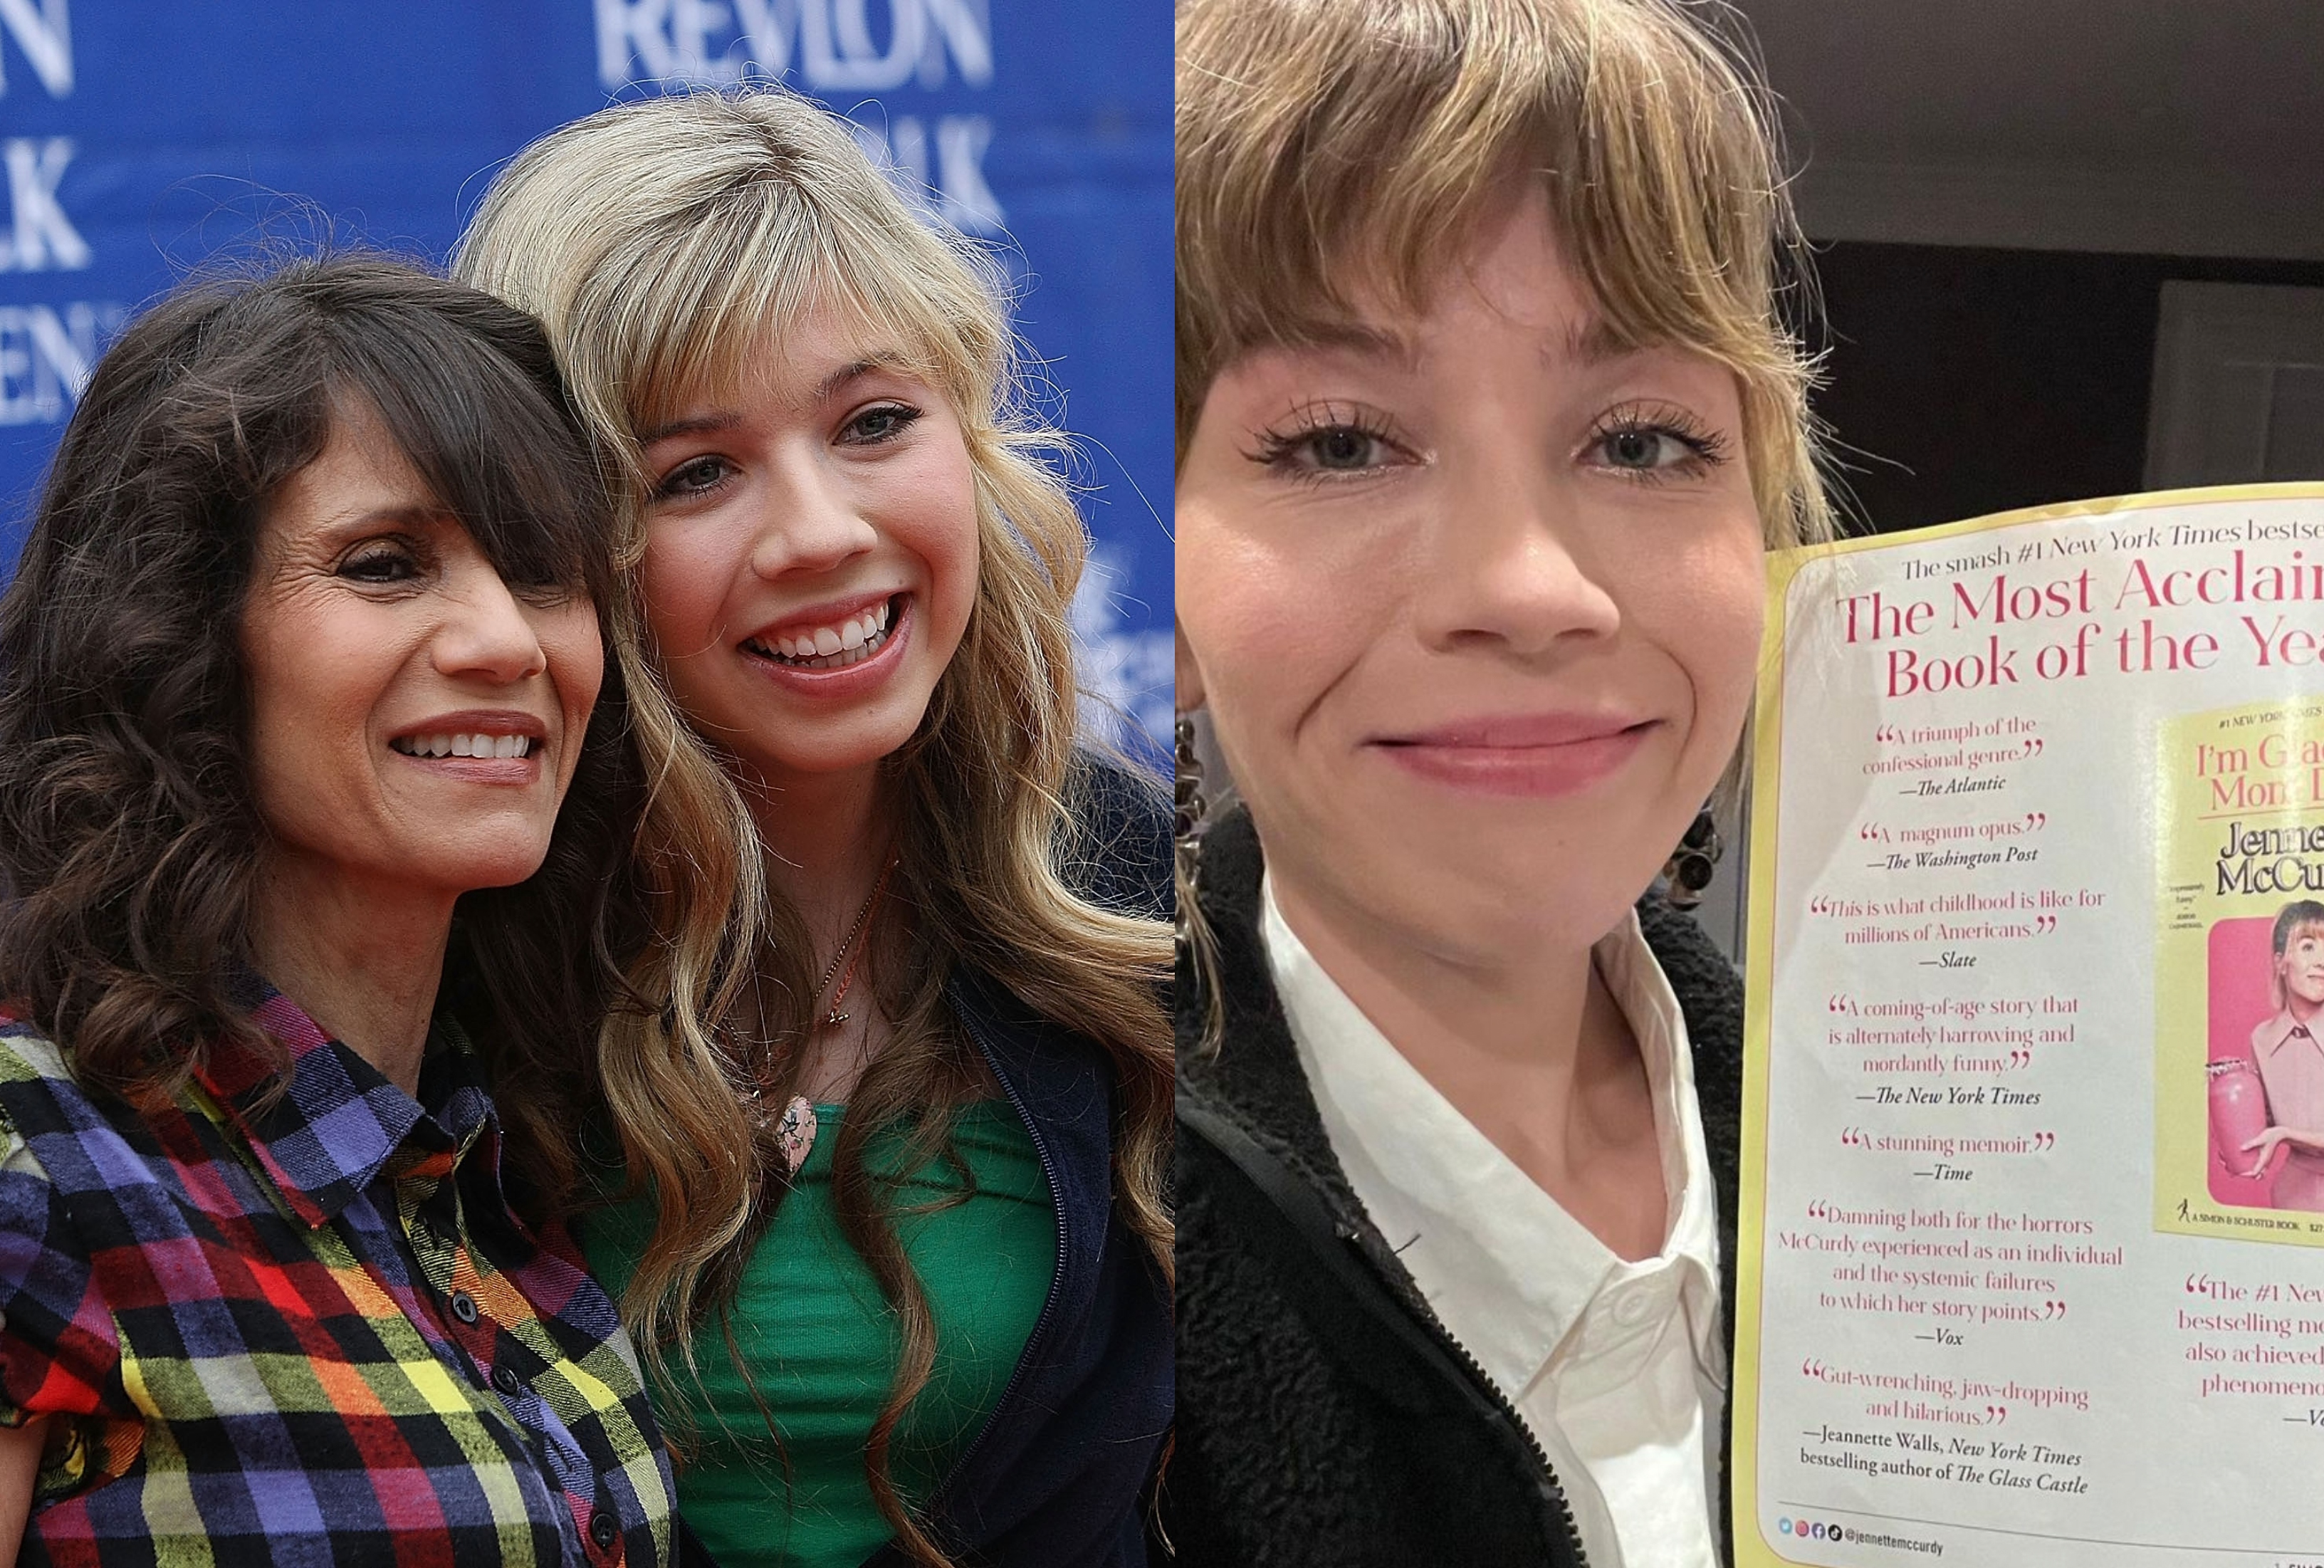 McCurdy Reveals Mom Gave Her Inappropriate Shower 'Exams